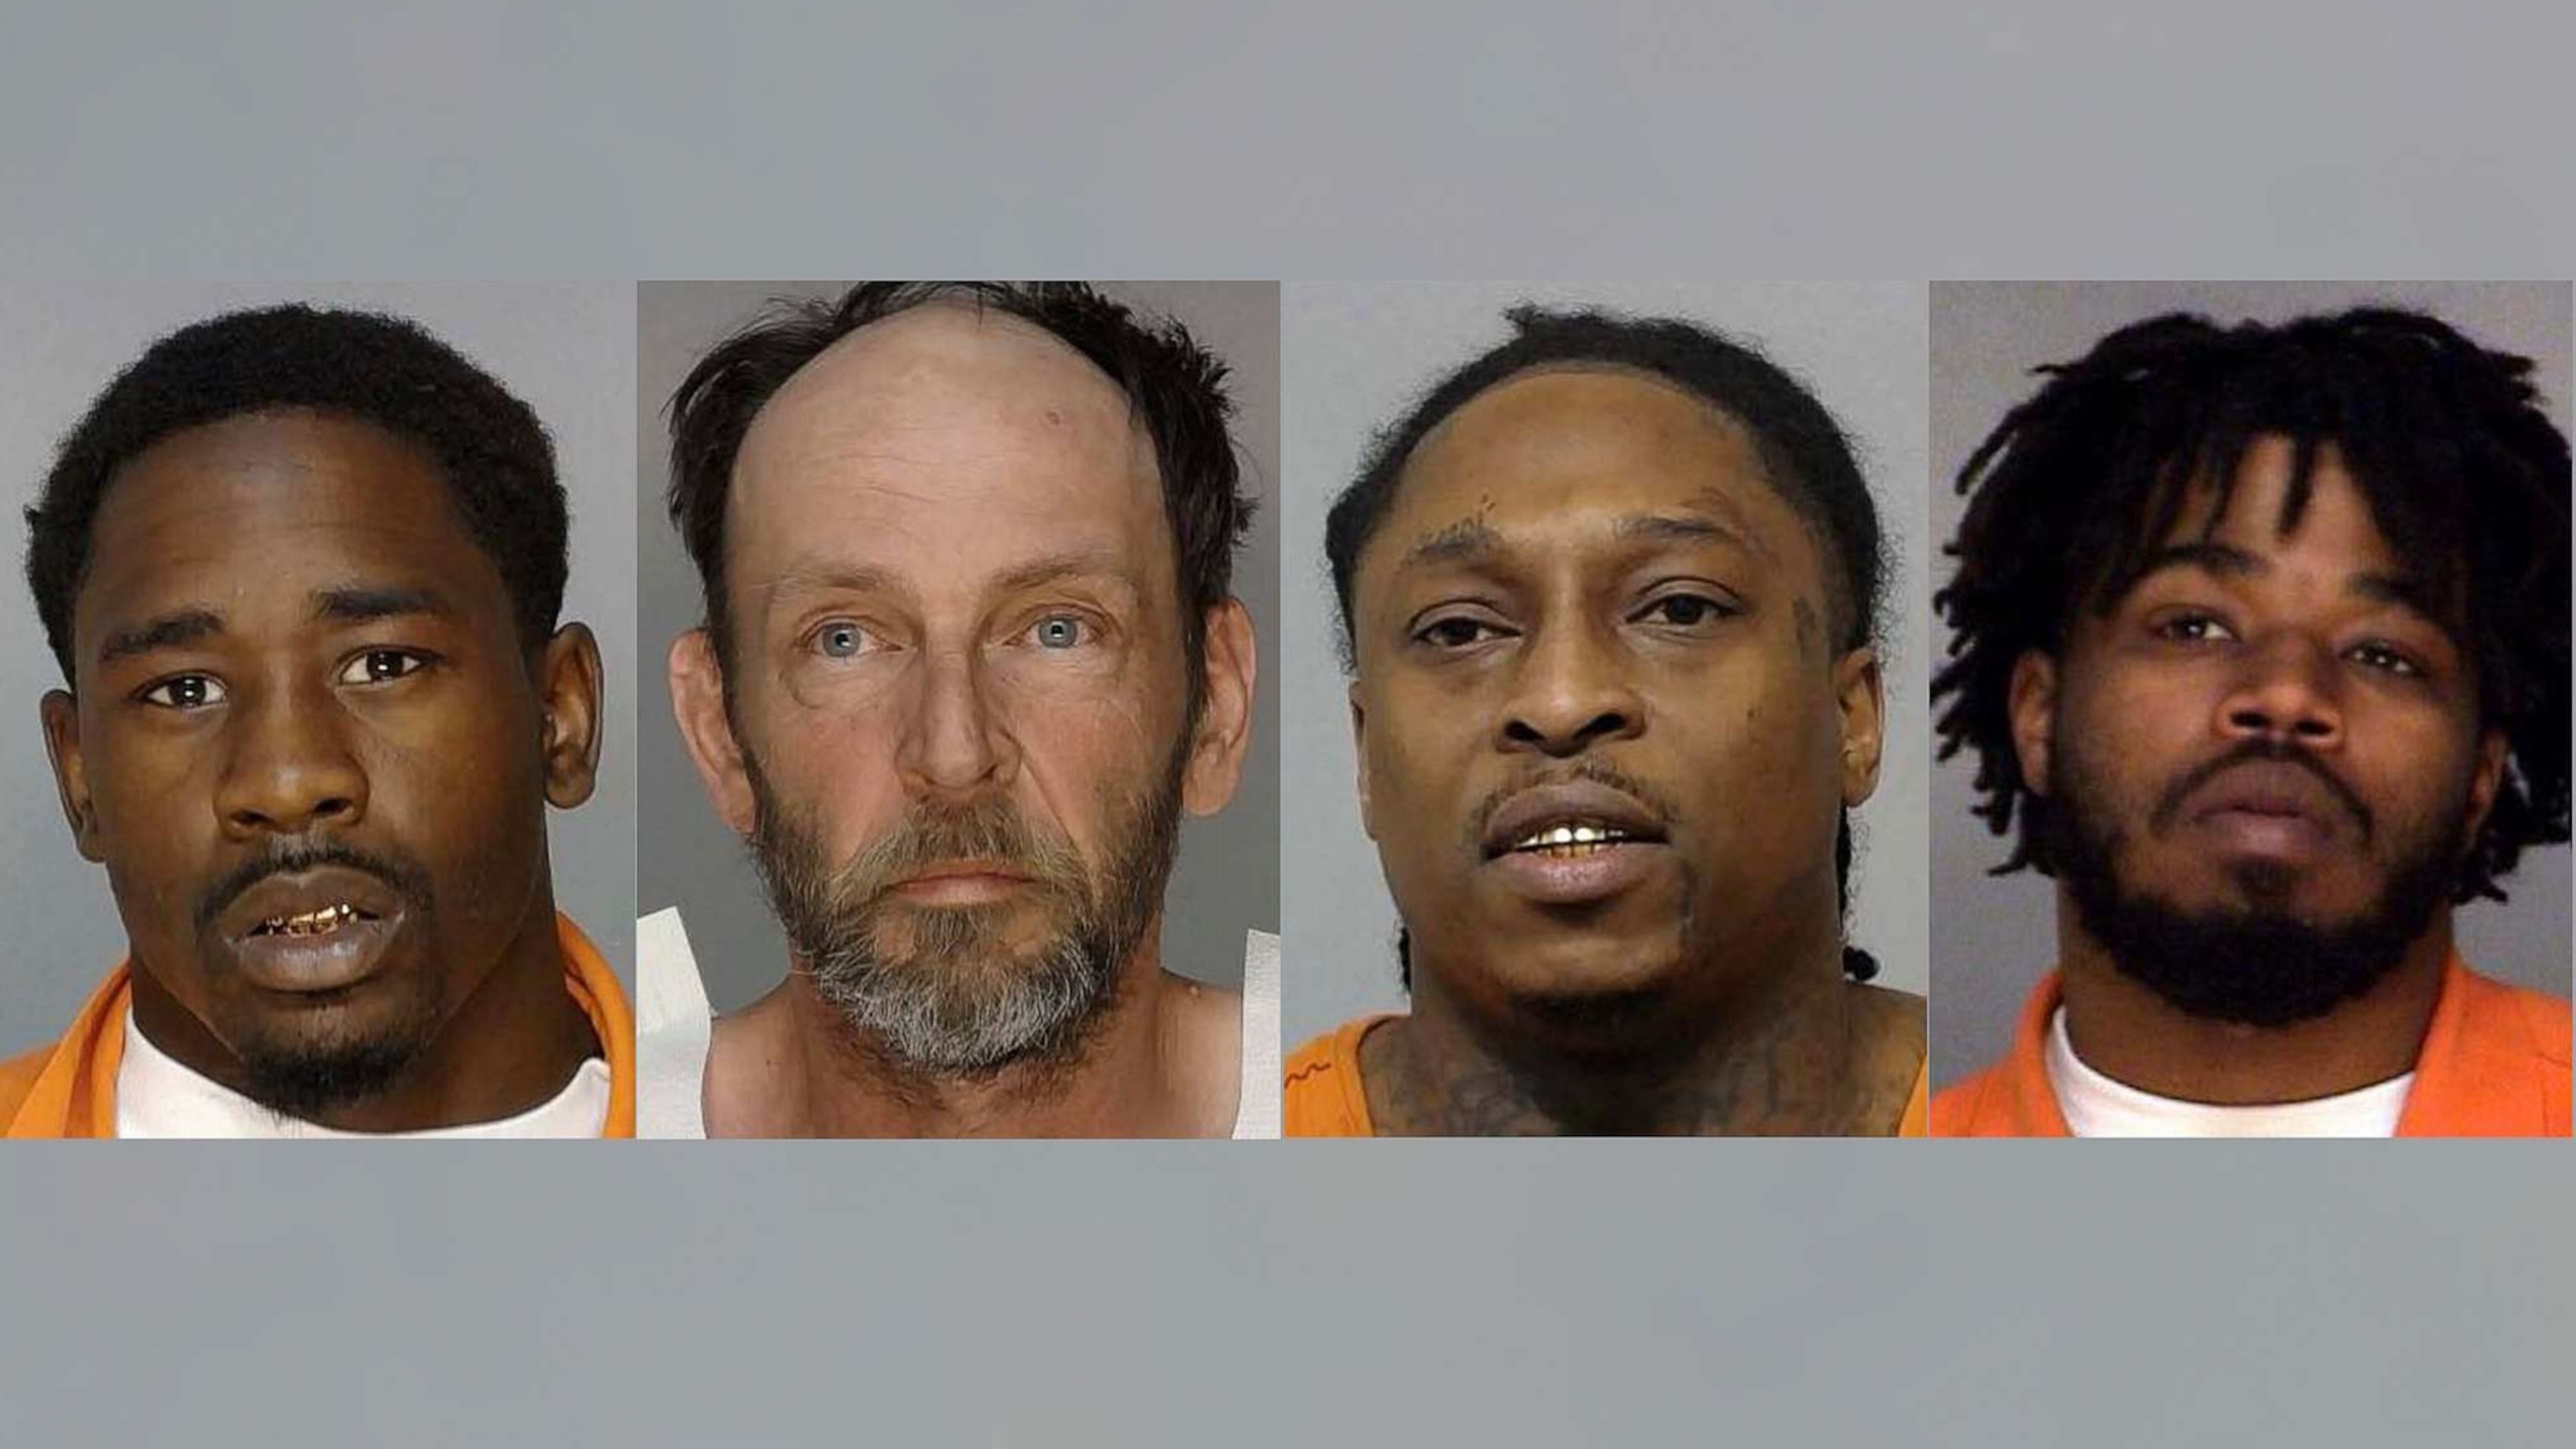 PHOTO: Chavis Stokes, Joey Fournier, Johnifer Barnwell and Marck Anderson, four inmates who escaped from the Bibb County Detention Center in Georgia.